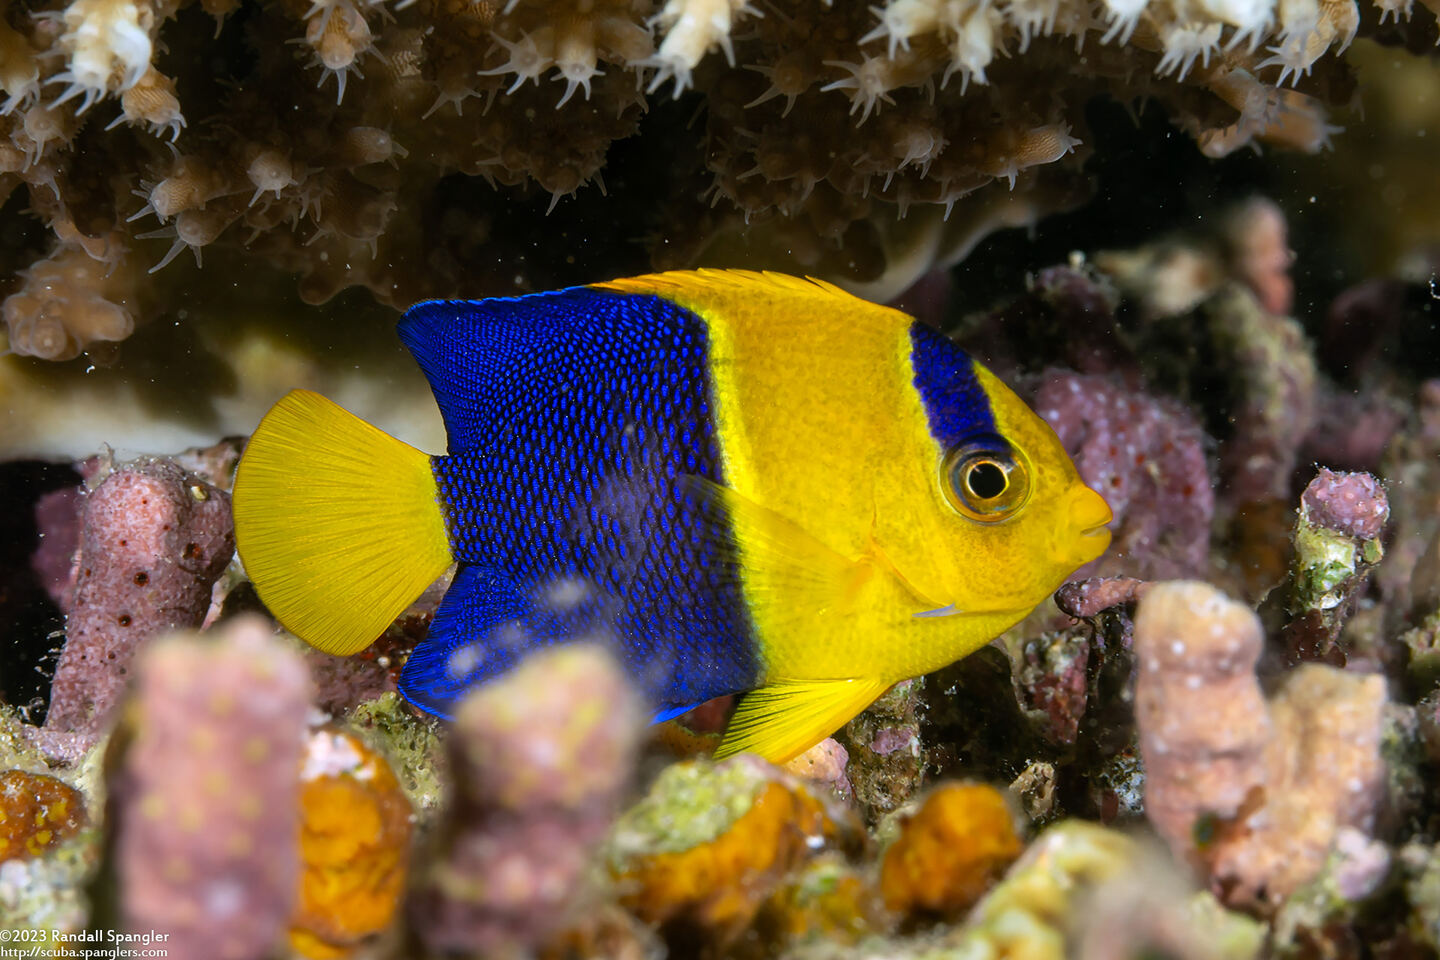 Centropyge bicolor (Bicolor Angelfish); A little one